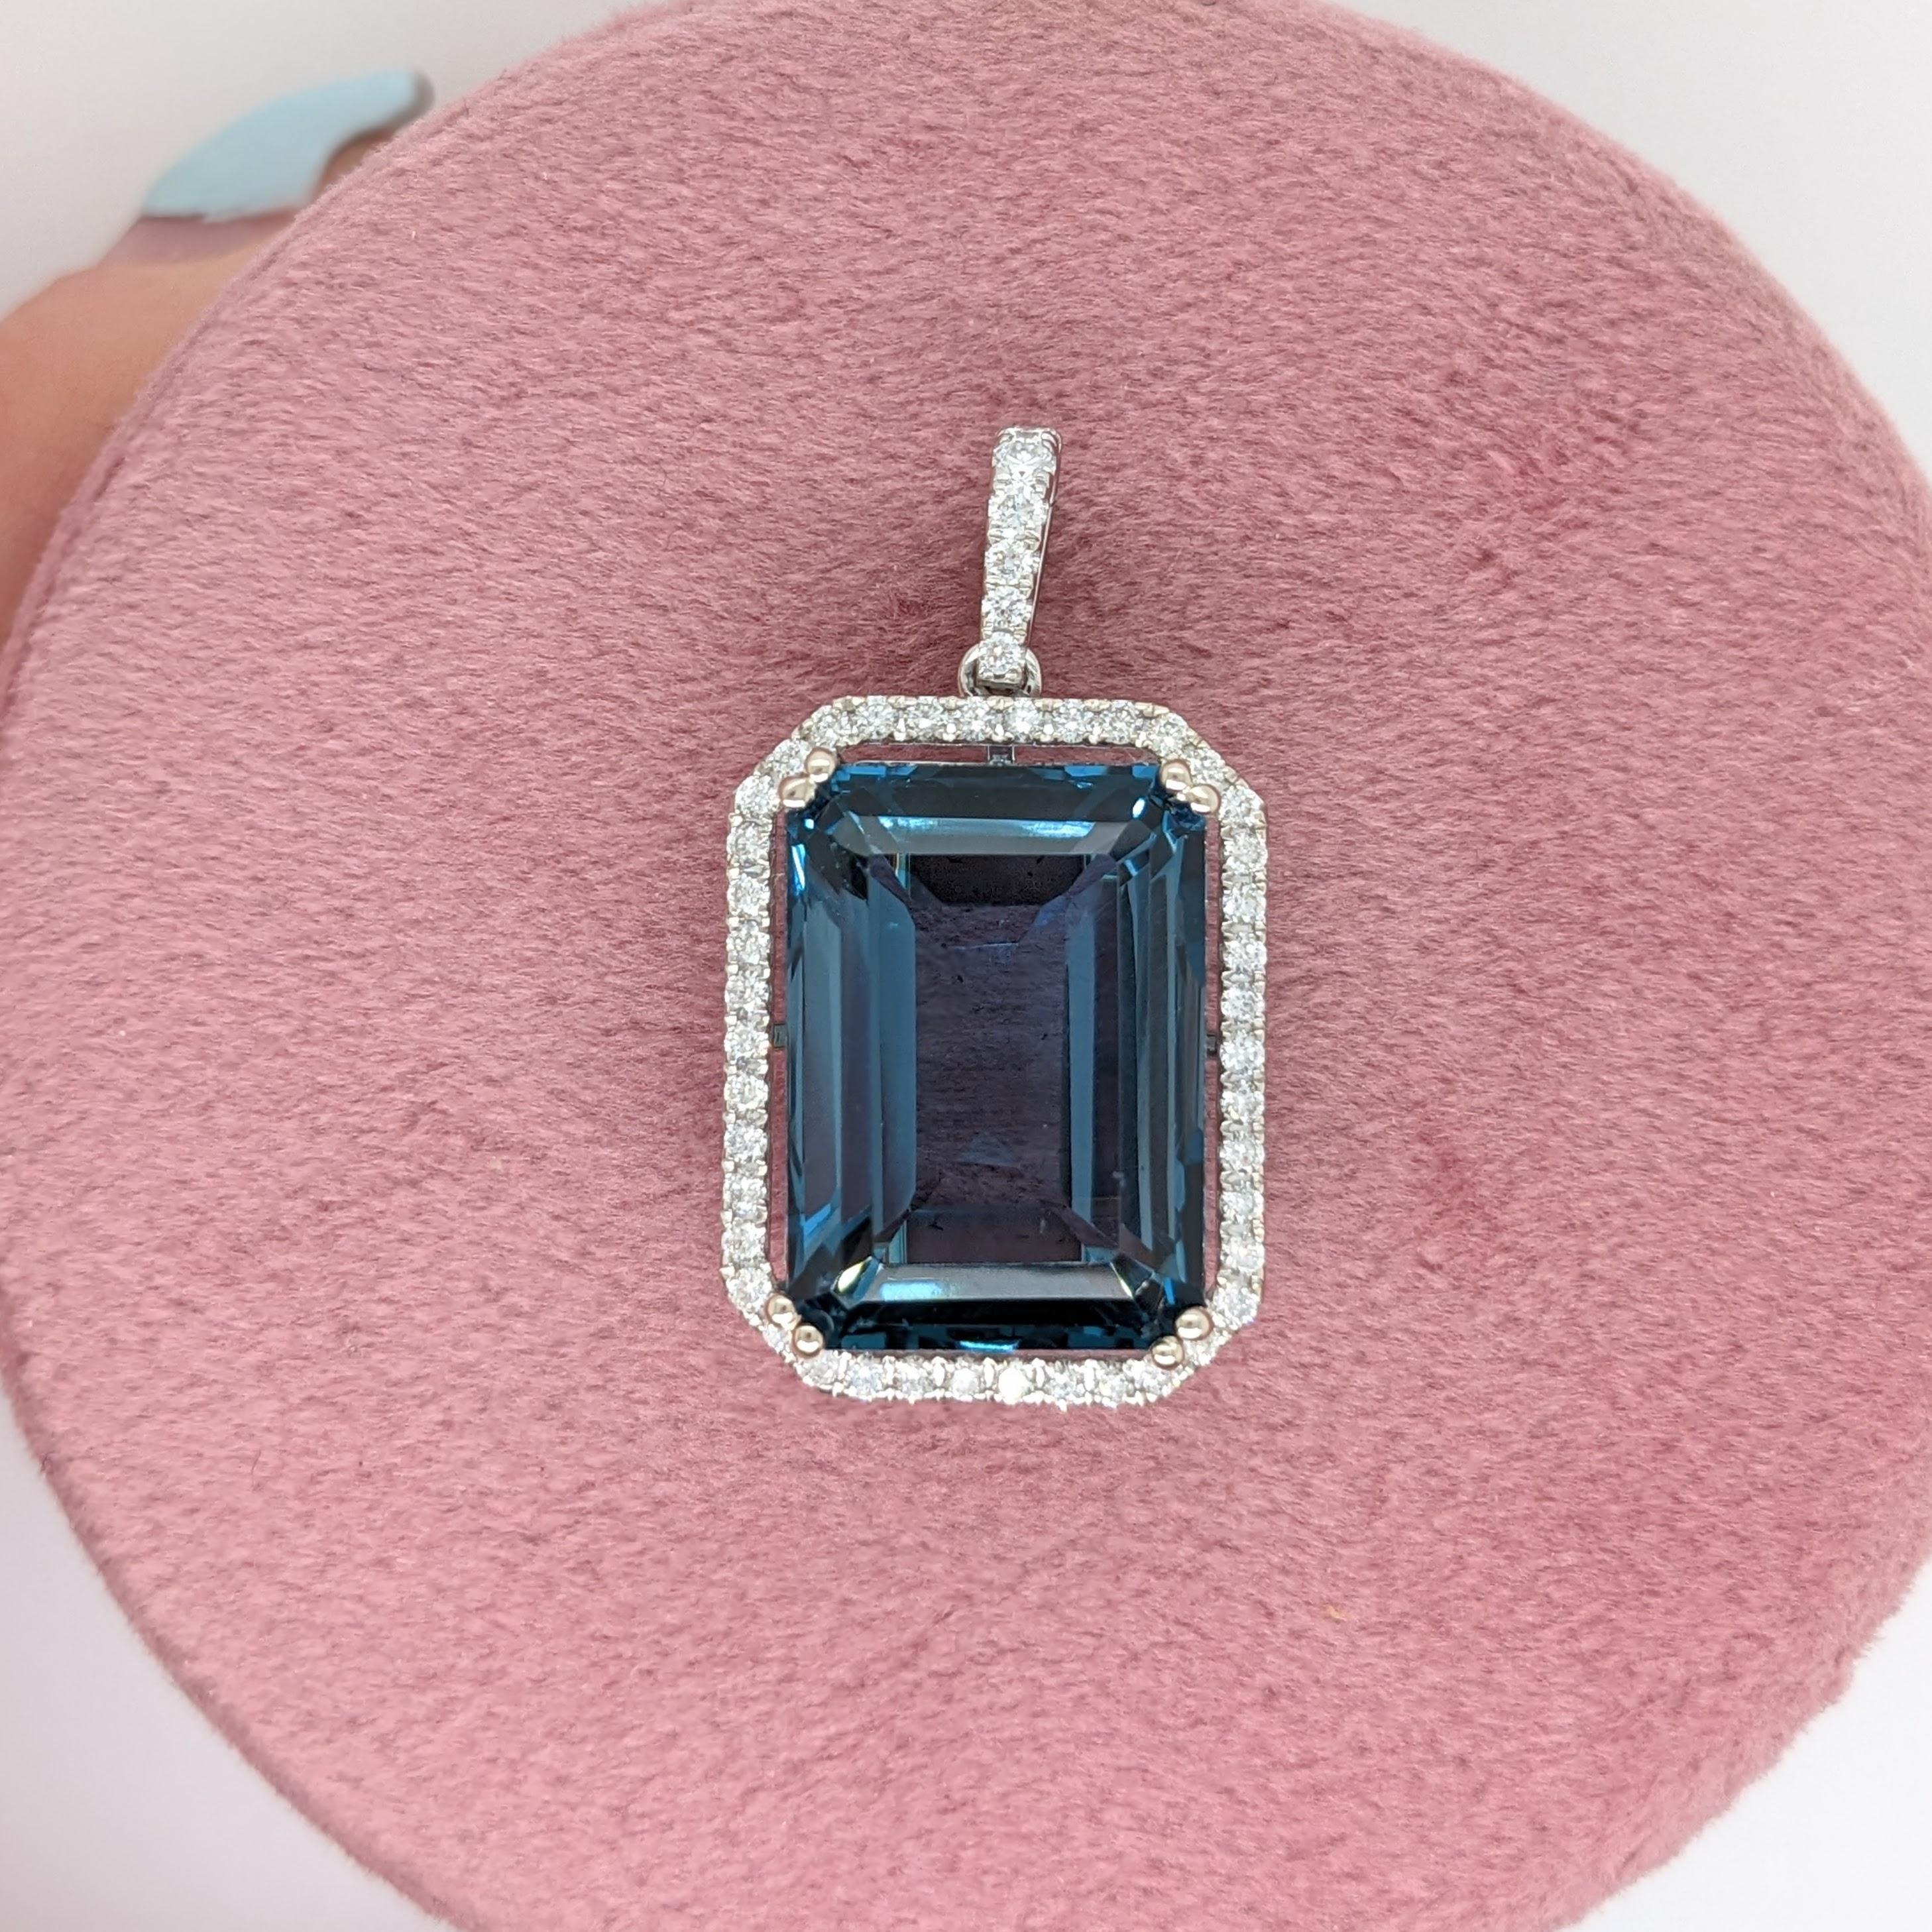 21ct London Topaz Pendant w Earth Mined Diamonds in Solid 14K Gold EM 18x13mm For Sale 2